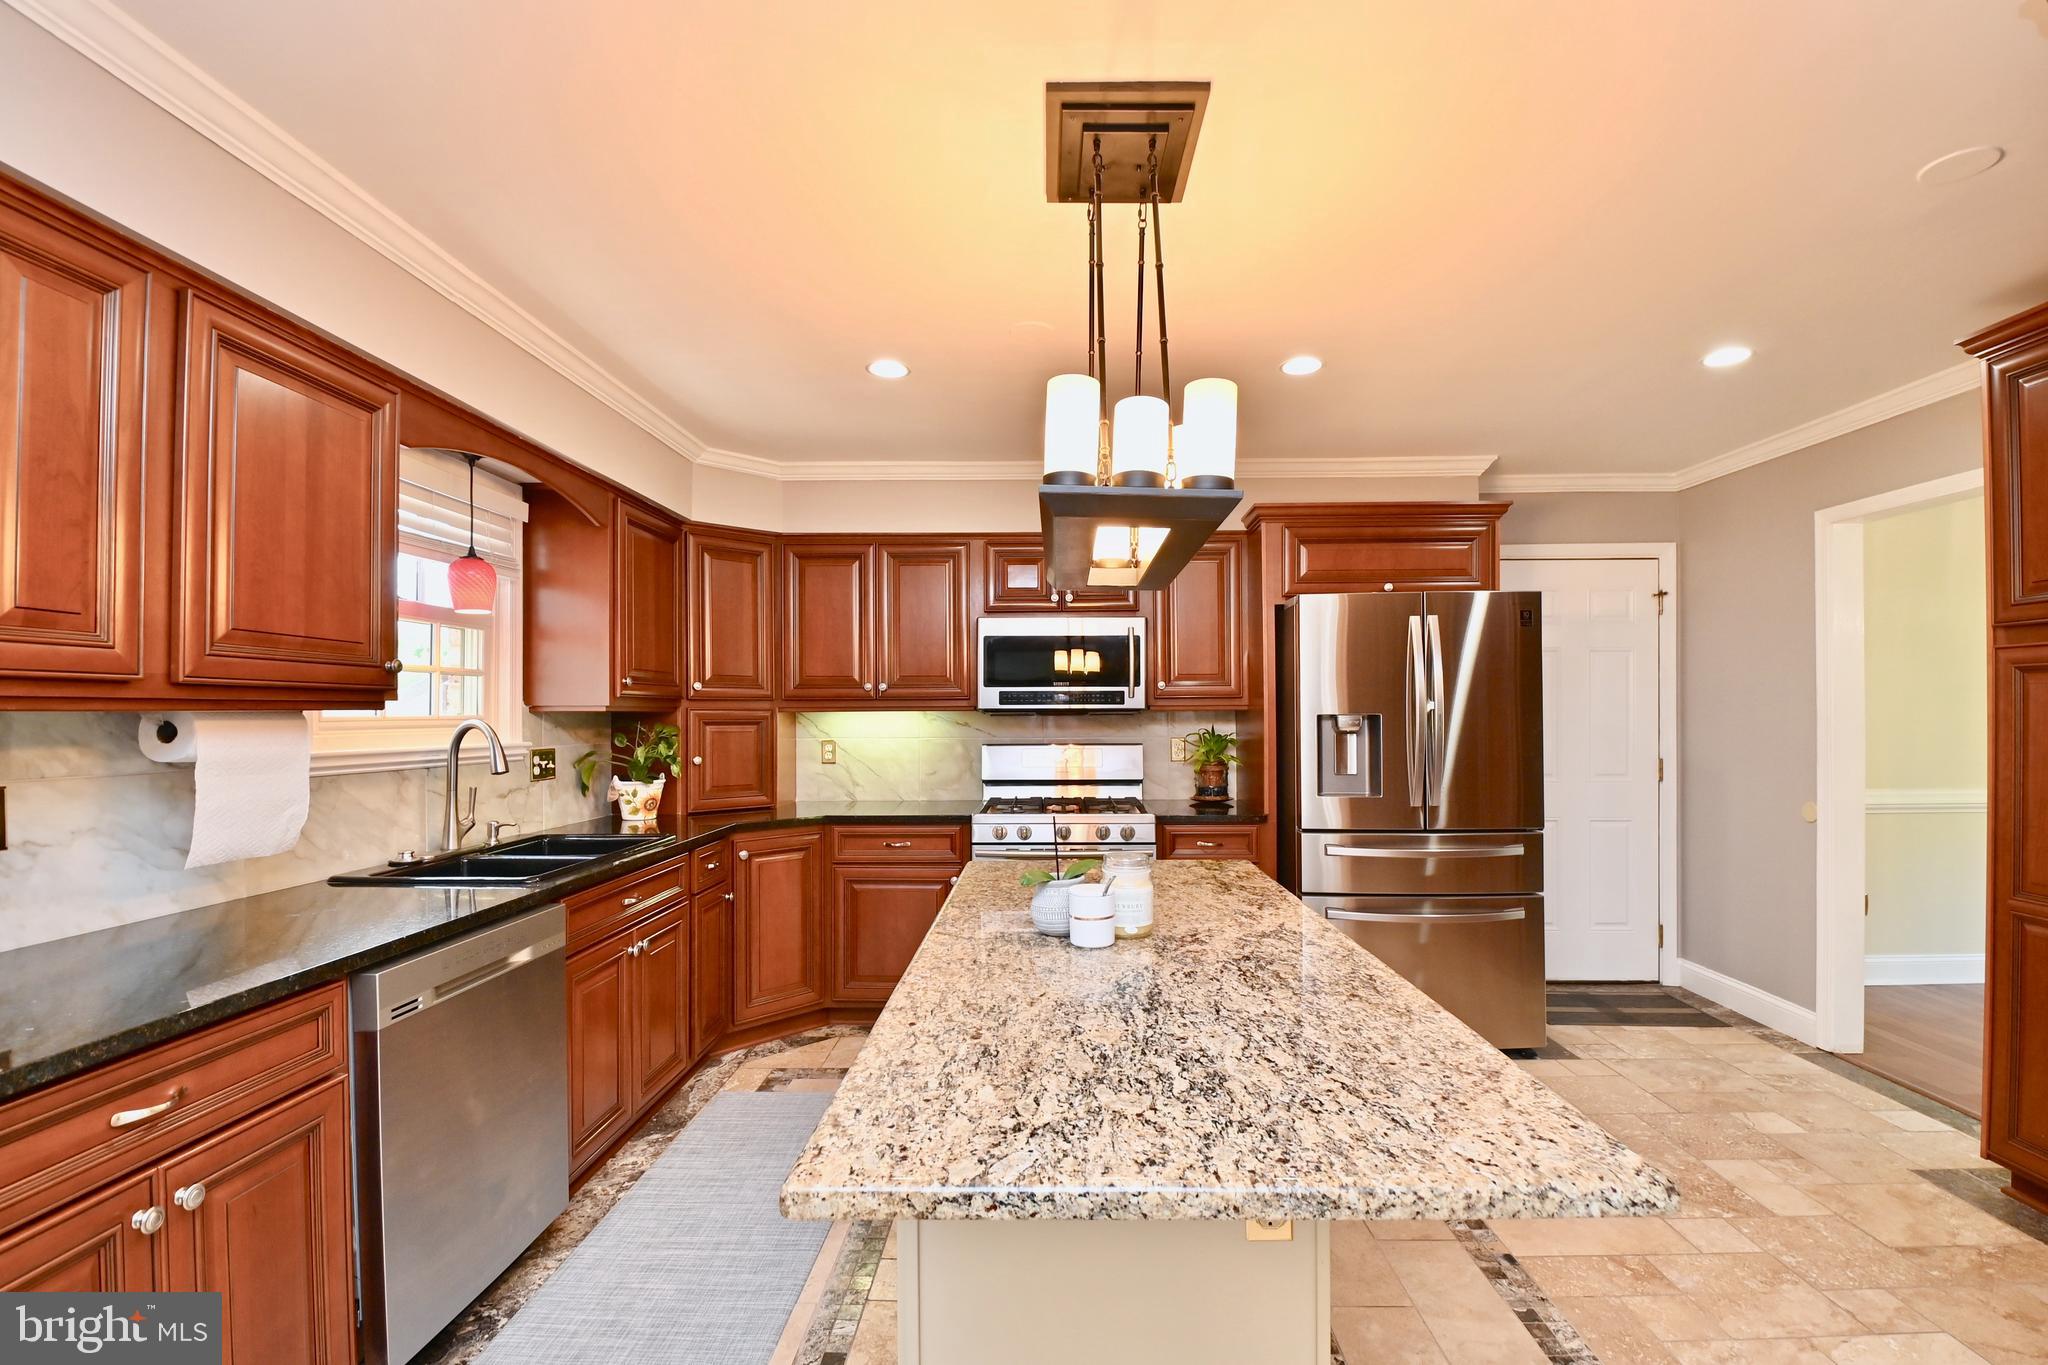 a kitchen with stainless steel appliances kitchen island granite countertop a sink and a wooden cabinets